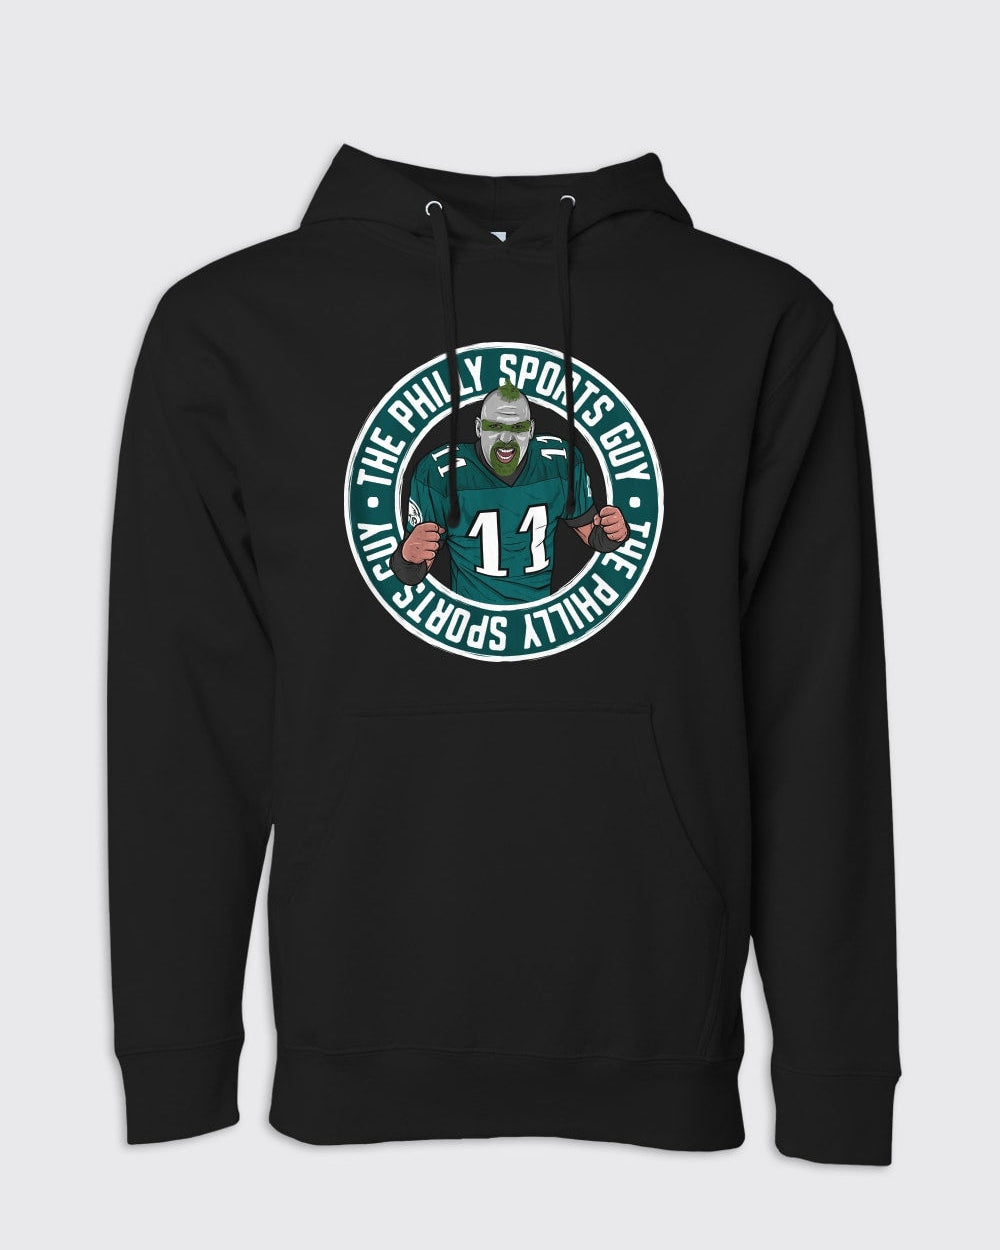 The Philly Sports Guy Logo Hoodie